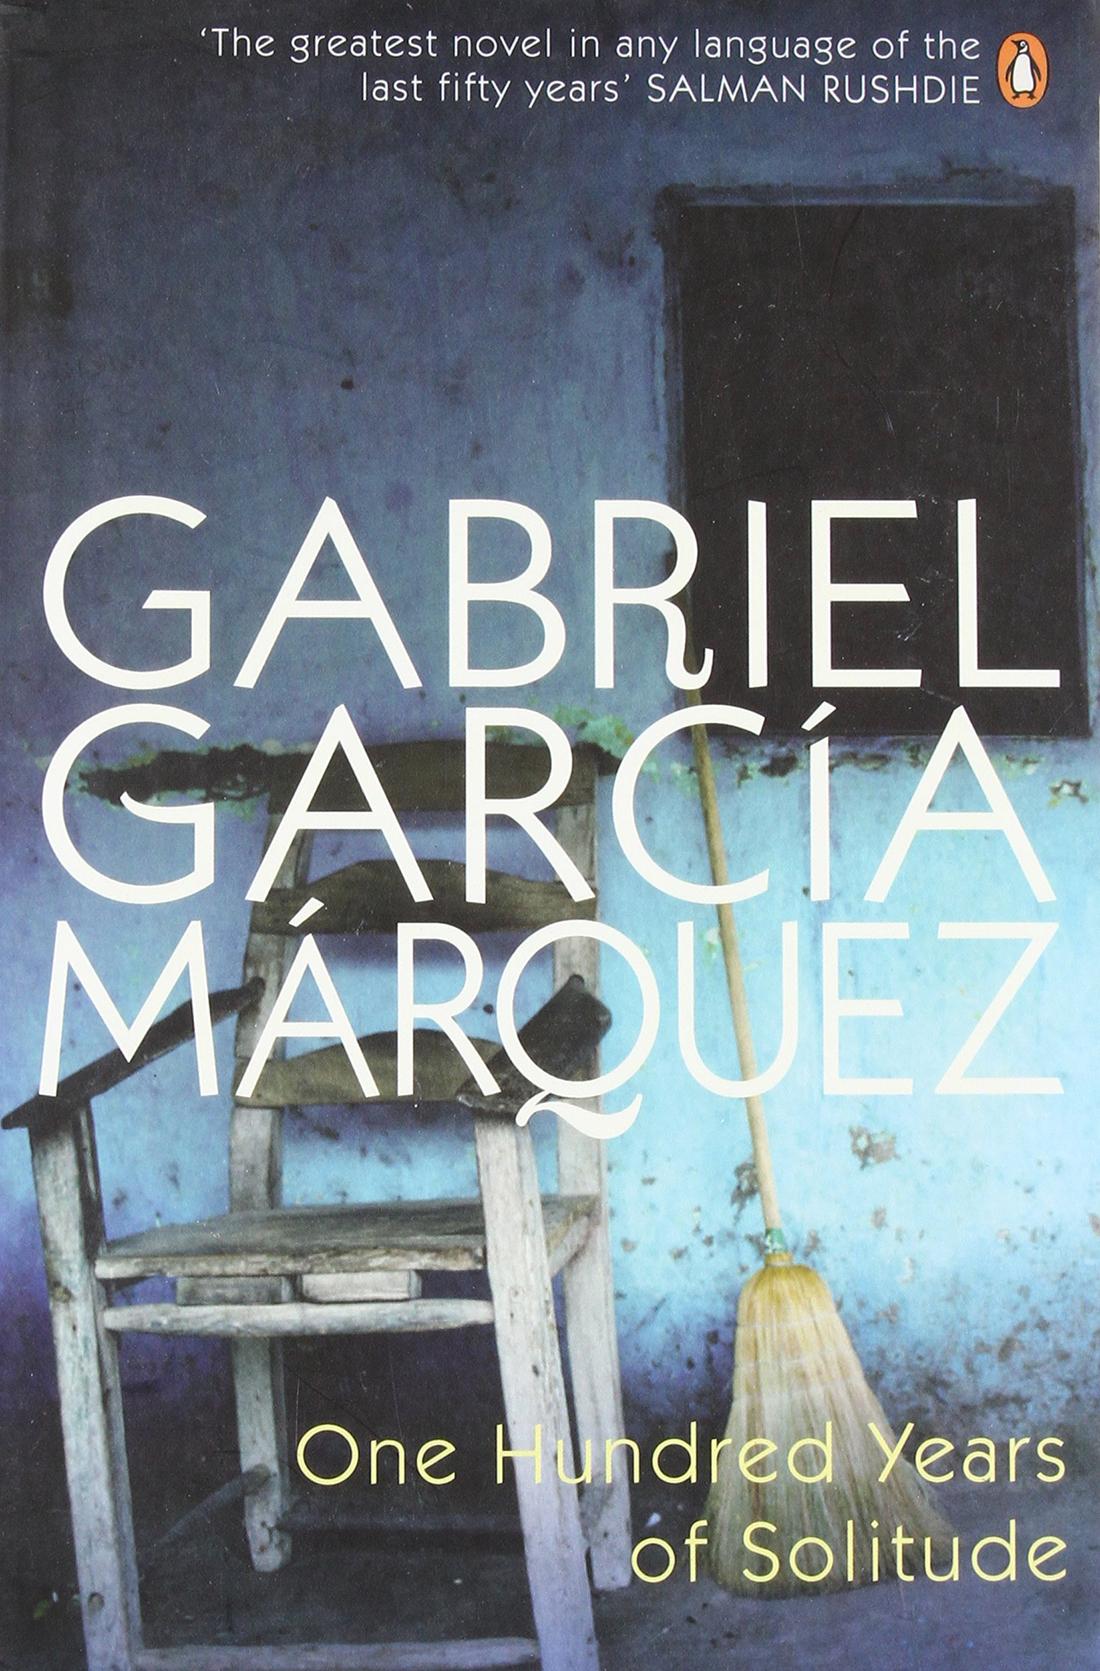 Decor Gabriel Garcia Marquez "One Hundred Years of Solitude" BOOK COVER print